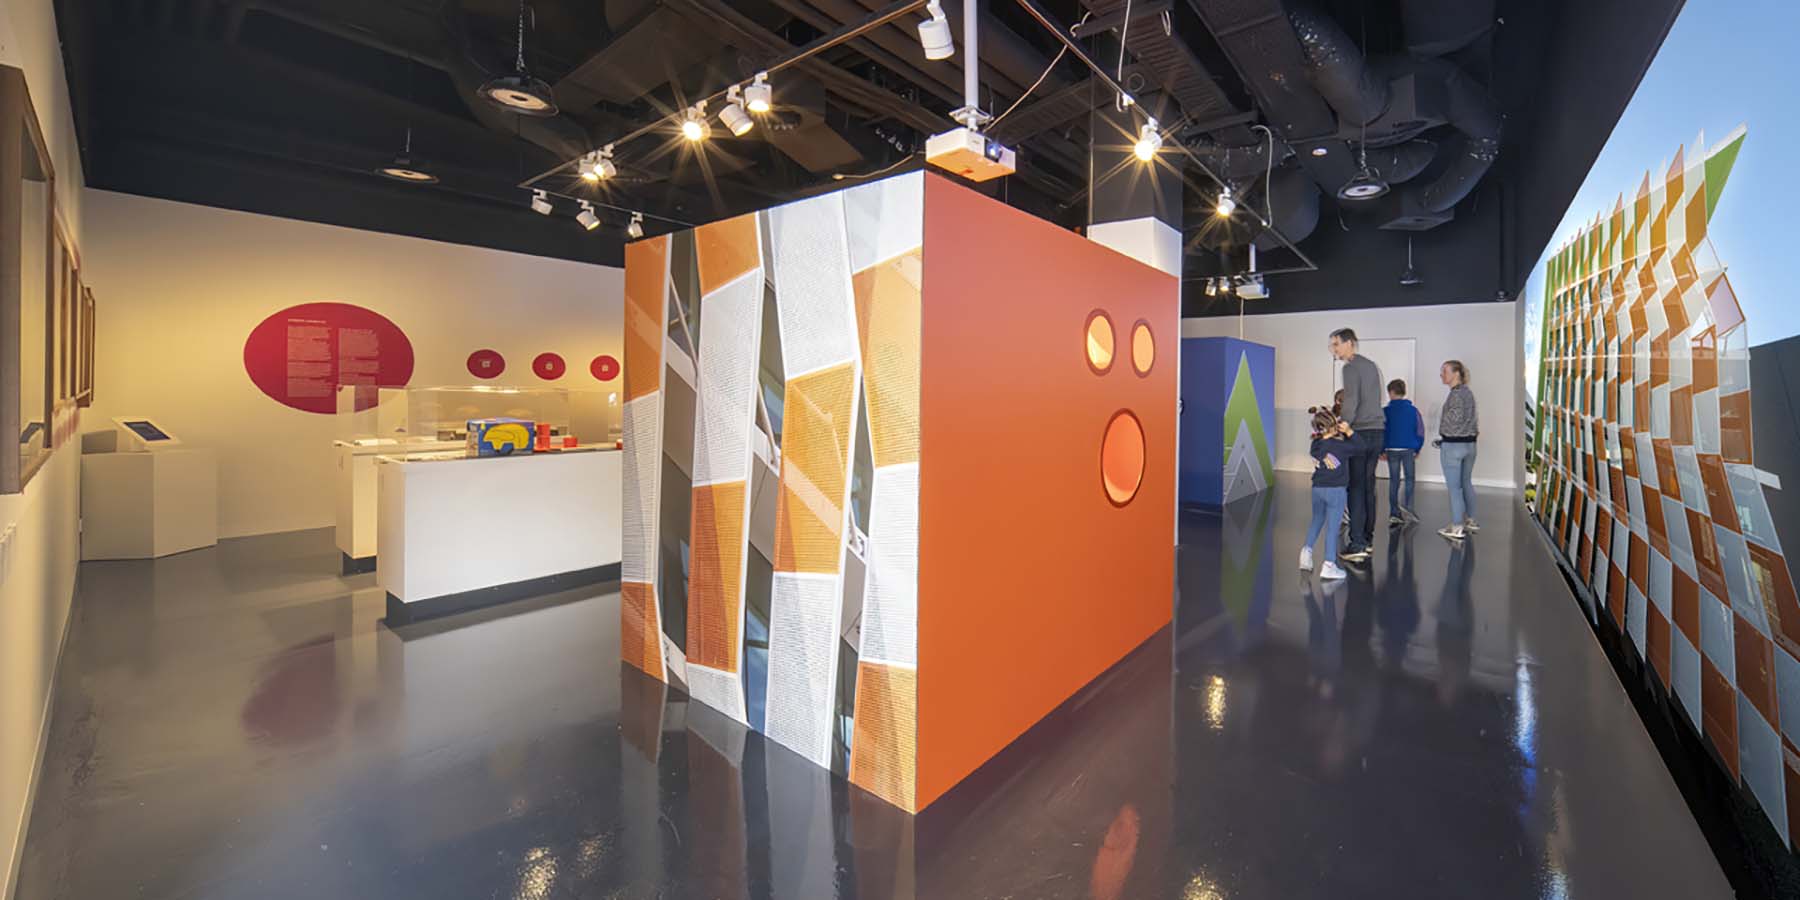 Light Colour Humanity exhibition at CMAG. View of orange and blue cubes, objects display and large digital projection.